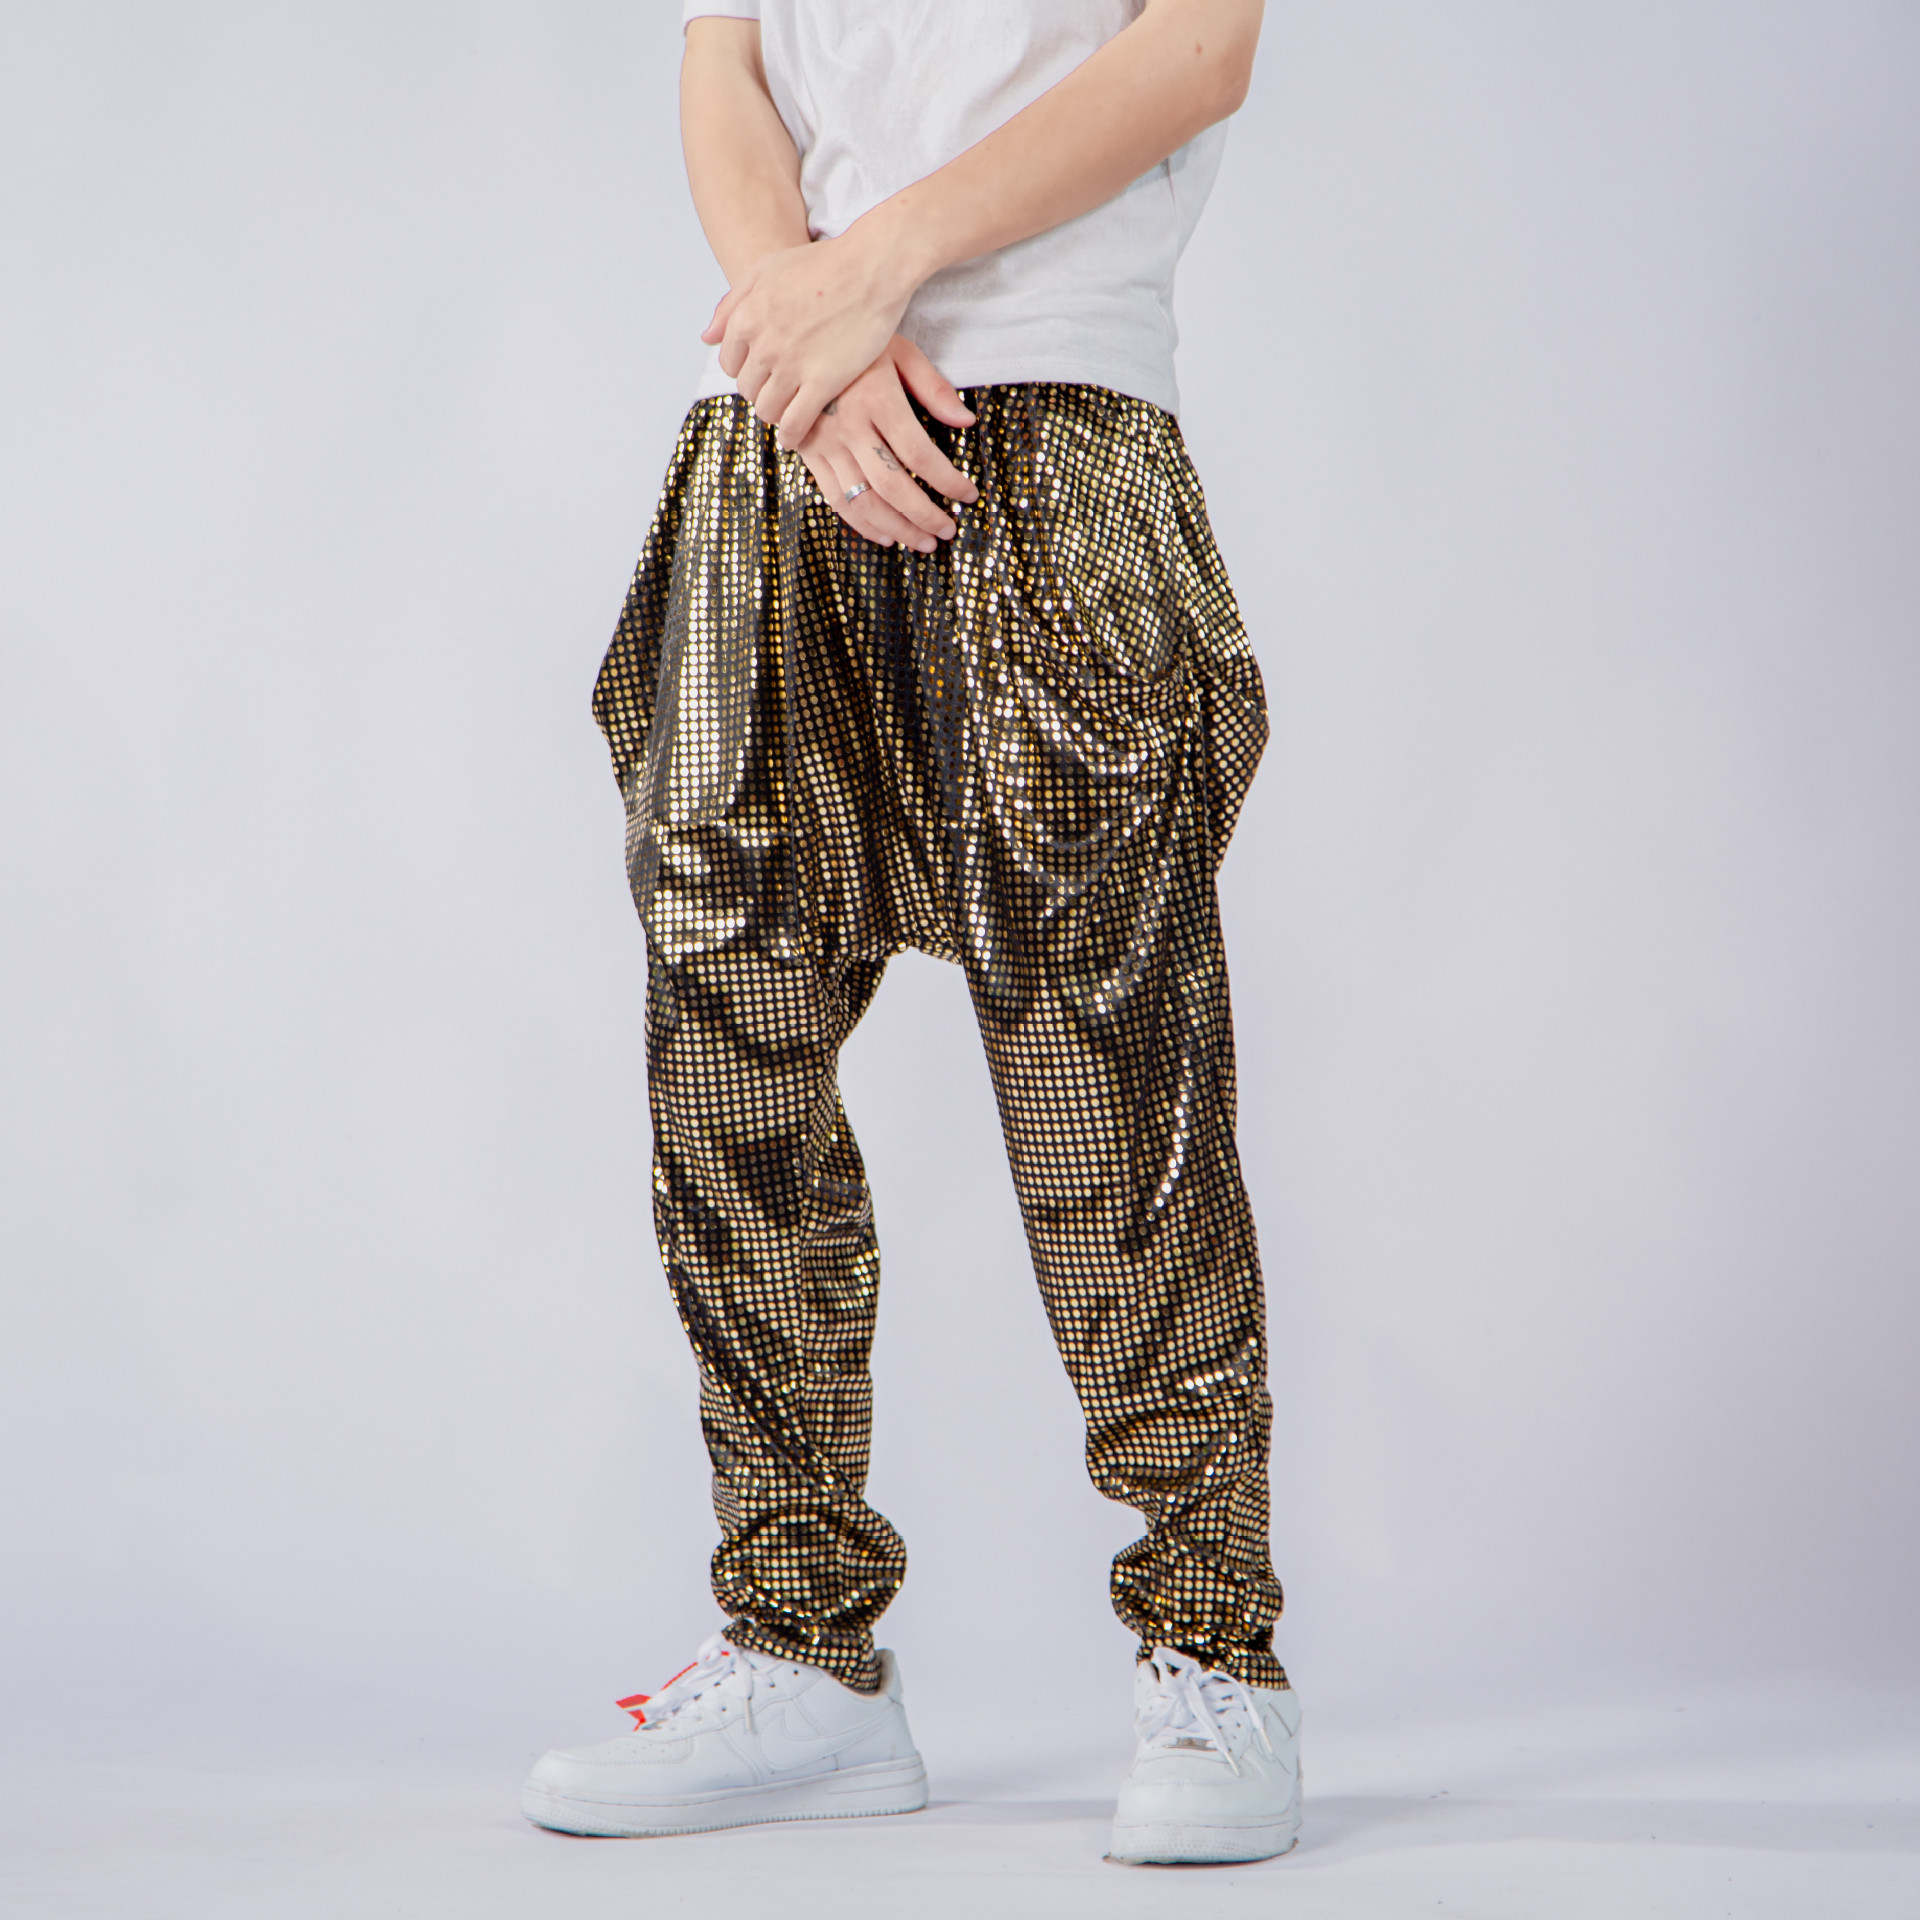 Eye-catching Shiny Black Men's Sequin Pants to Make a Statement